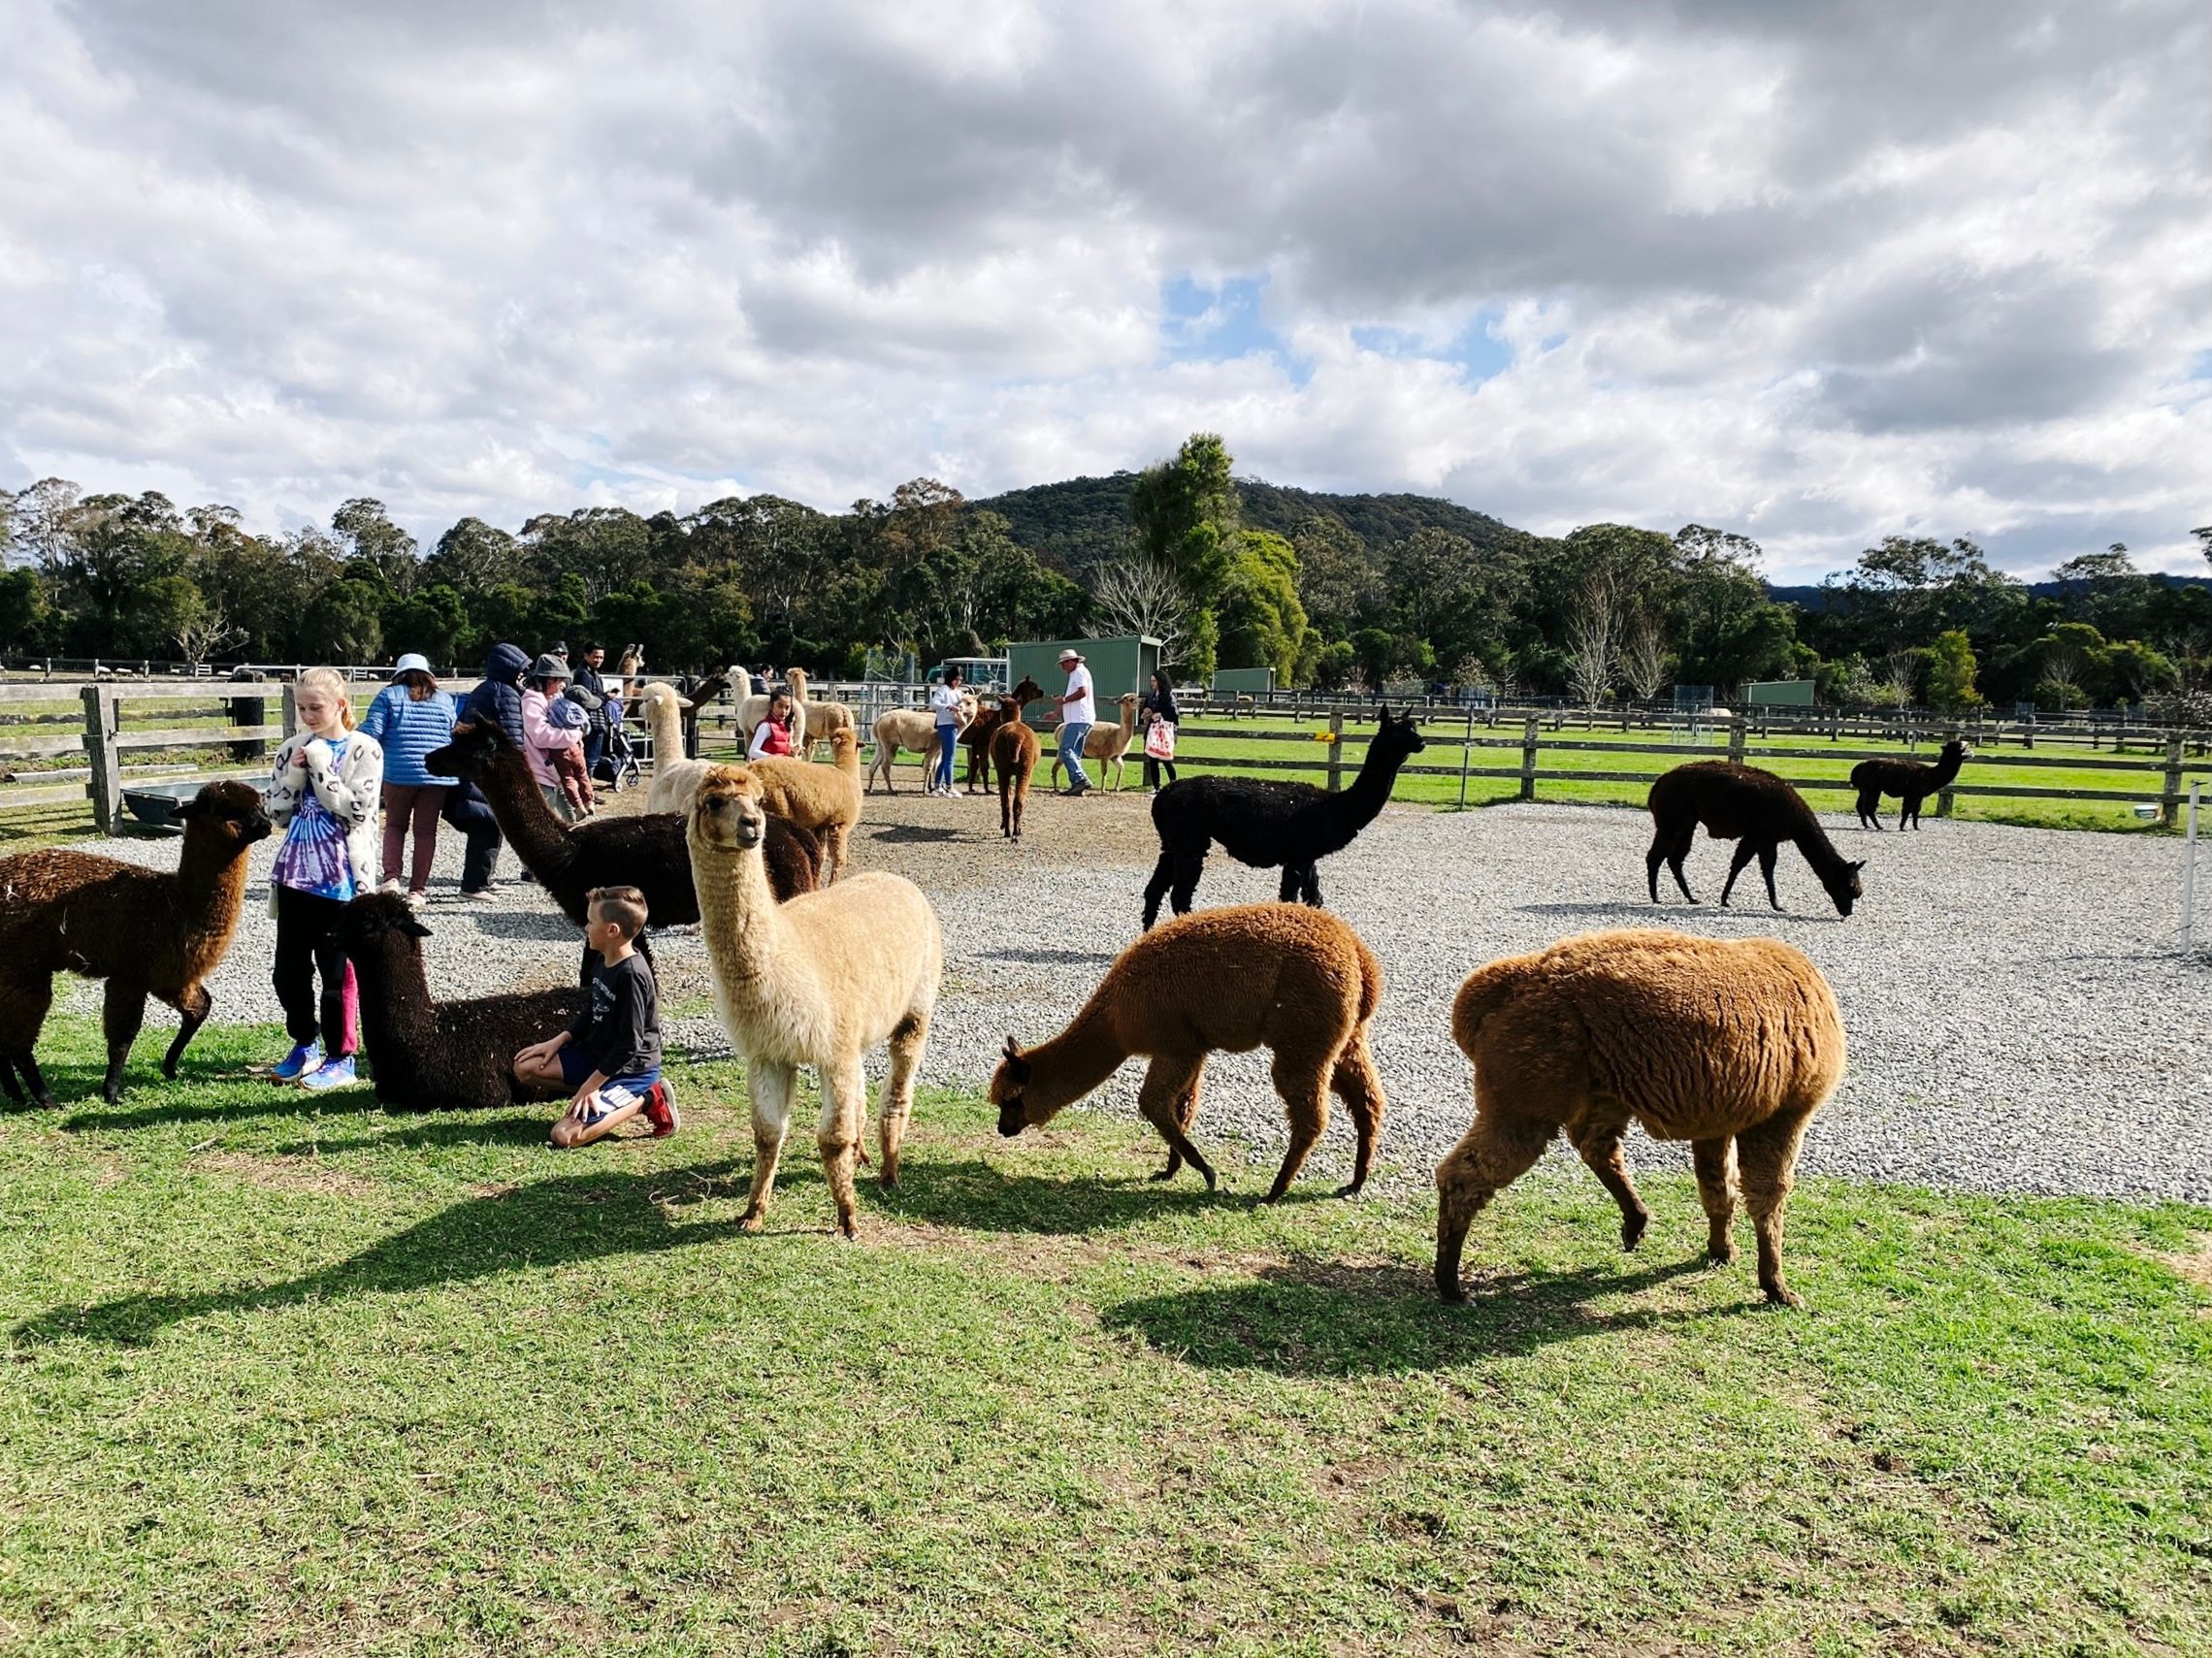 A photo of a farm field with a bunch of alpacas and people feeding them.